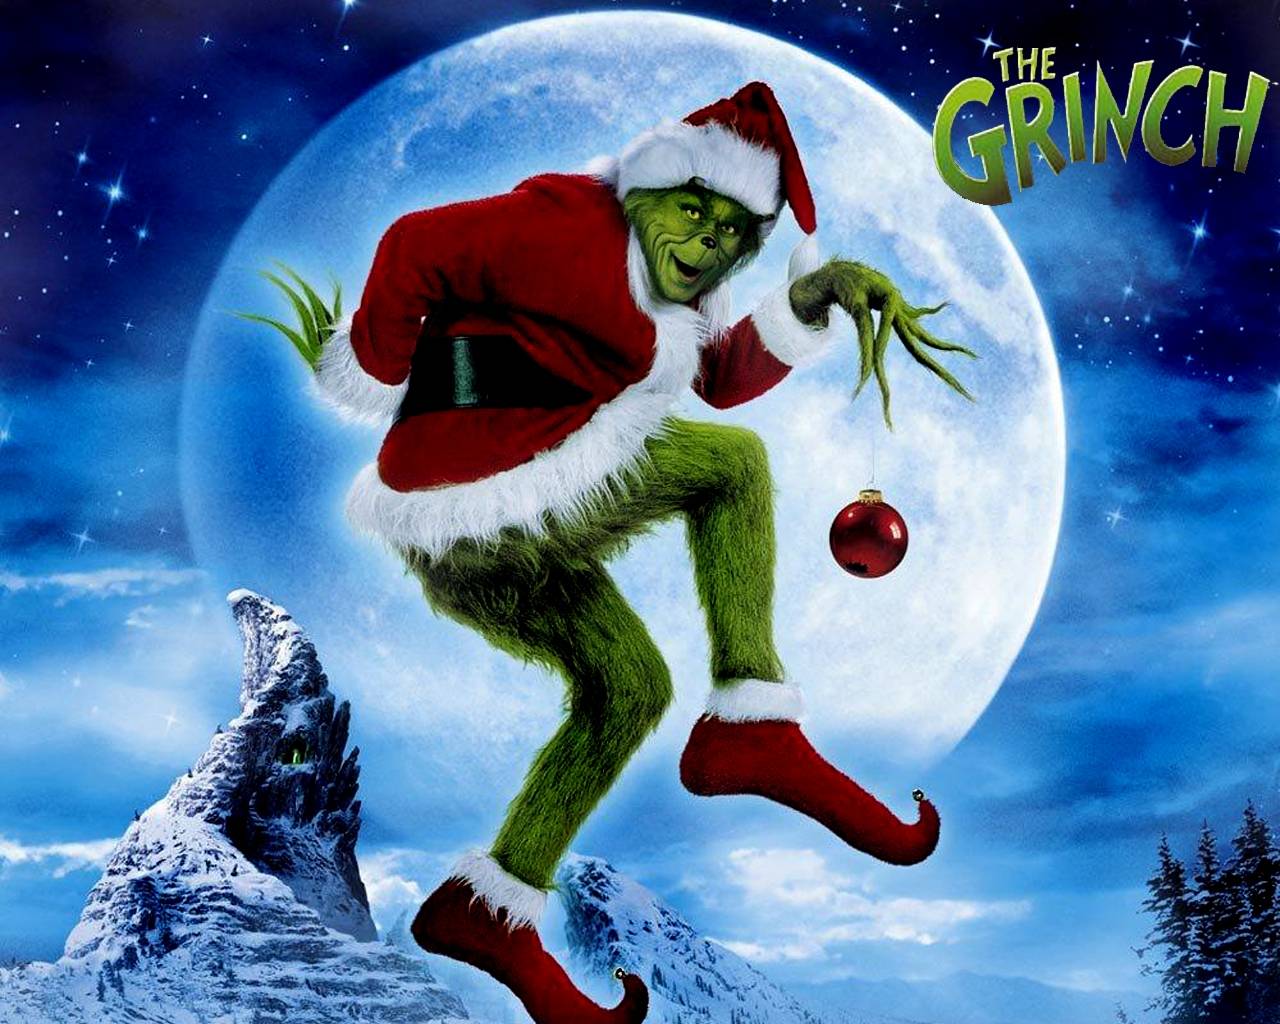 The Grinch (Wallpaper) - Movies Wallpaper